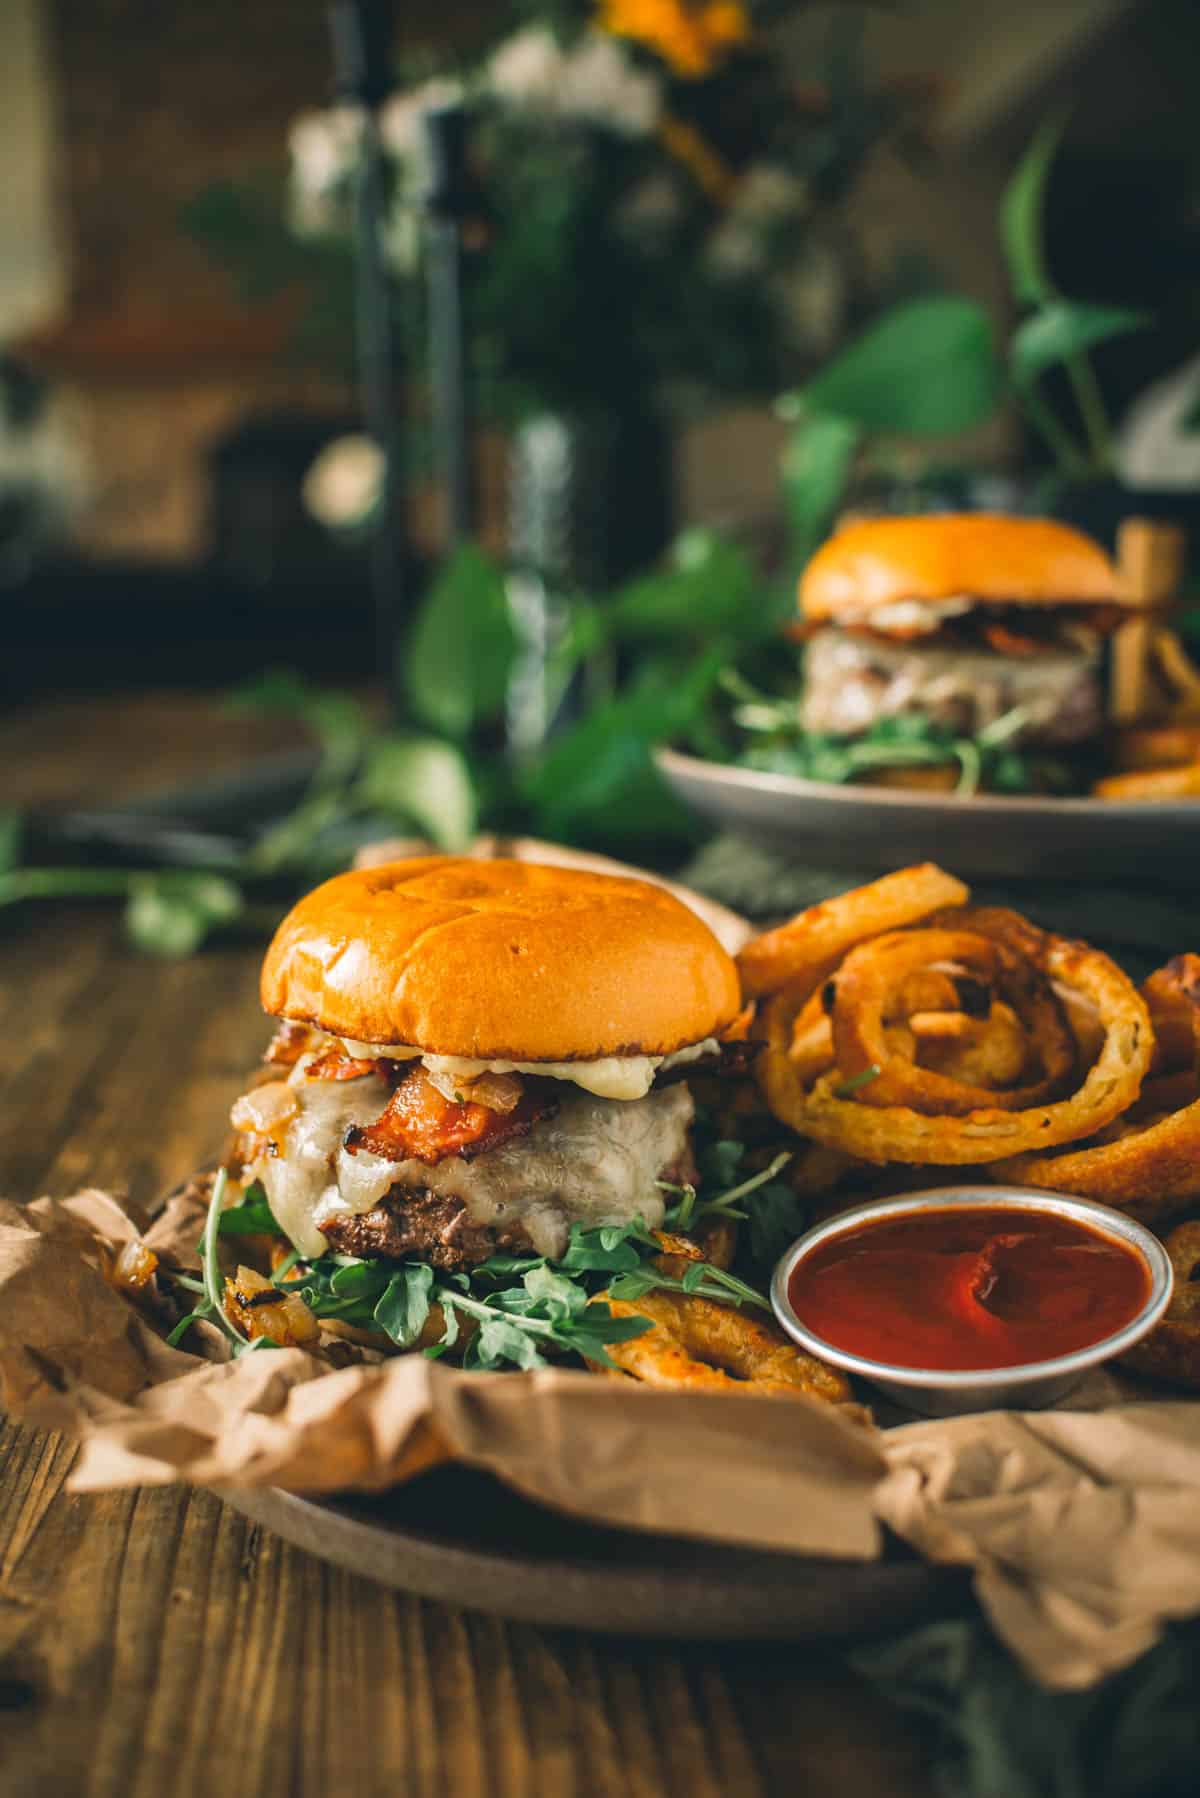 A bacon cheeseburger placed on a plate with curly fries and a side of ketchup on a wooden table. Another burger and decorative plants are visible in the blurred background.